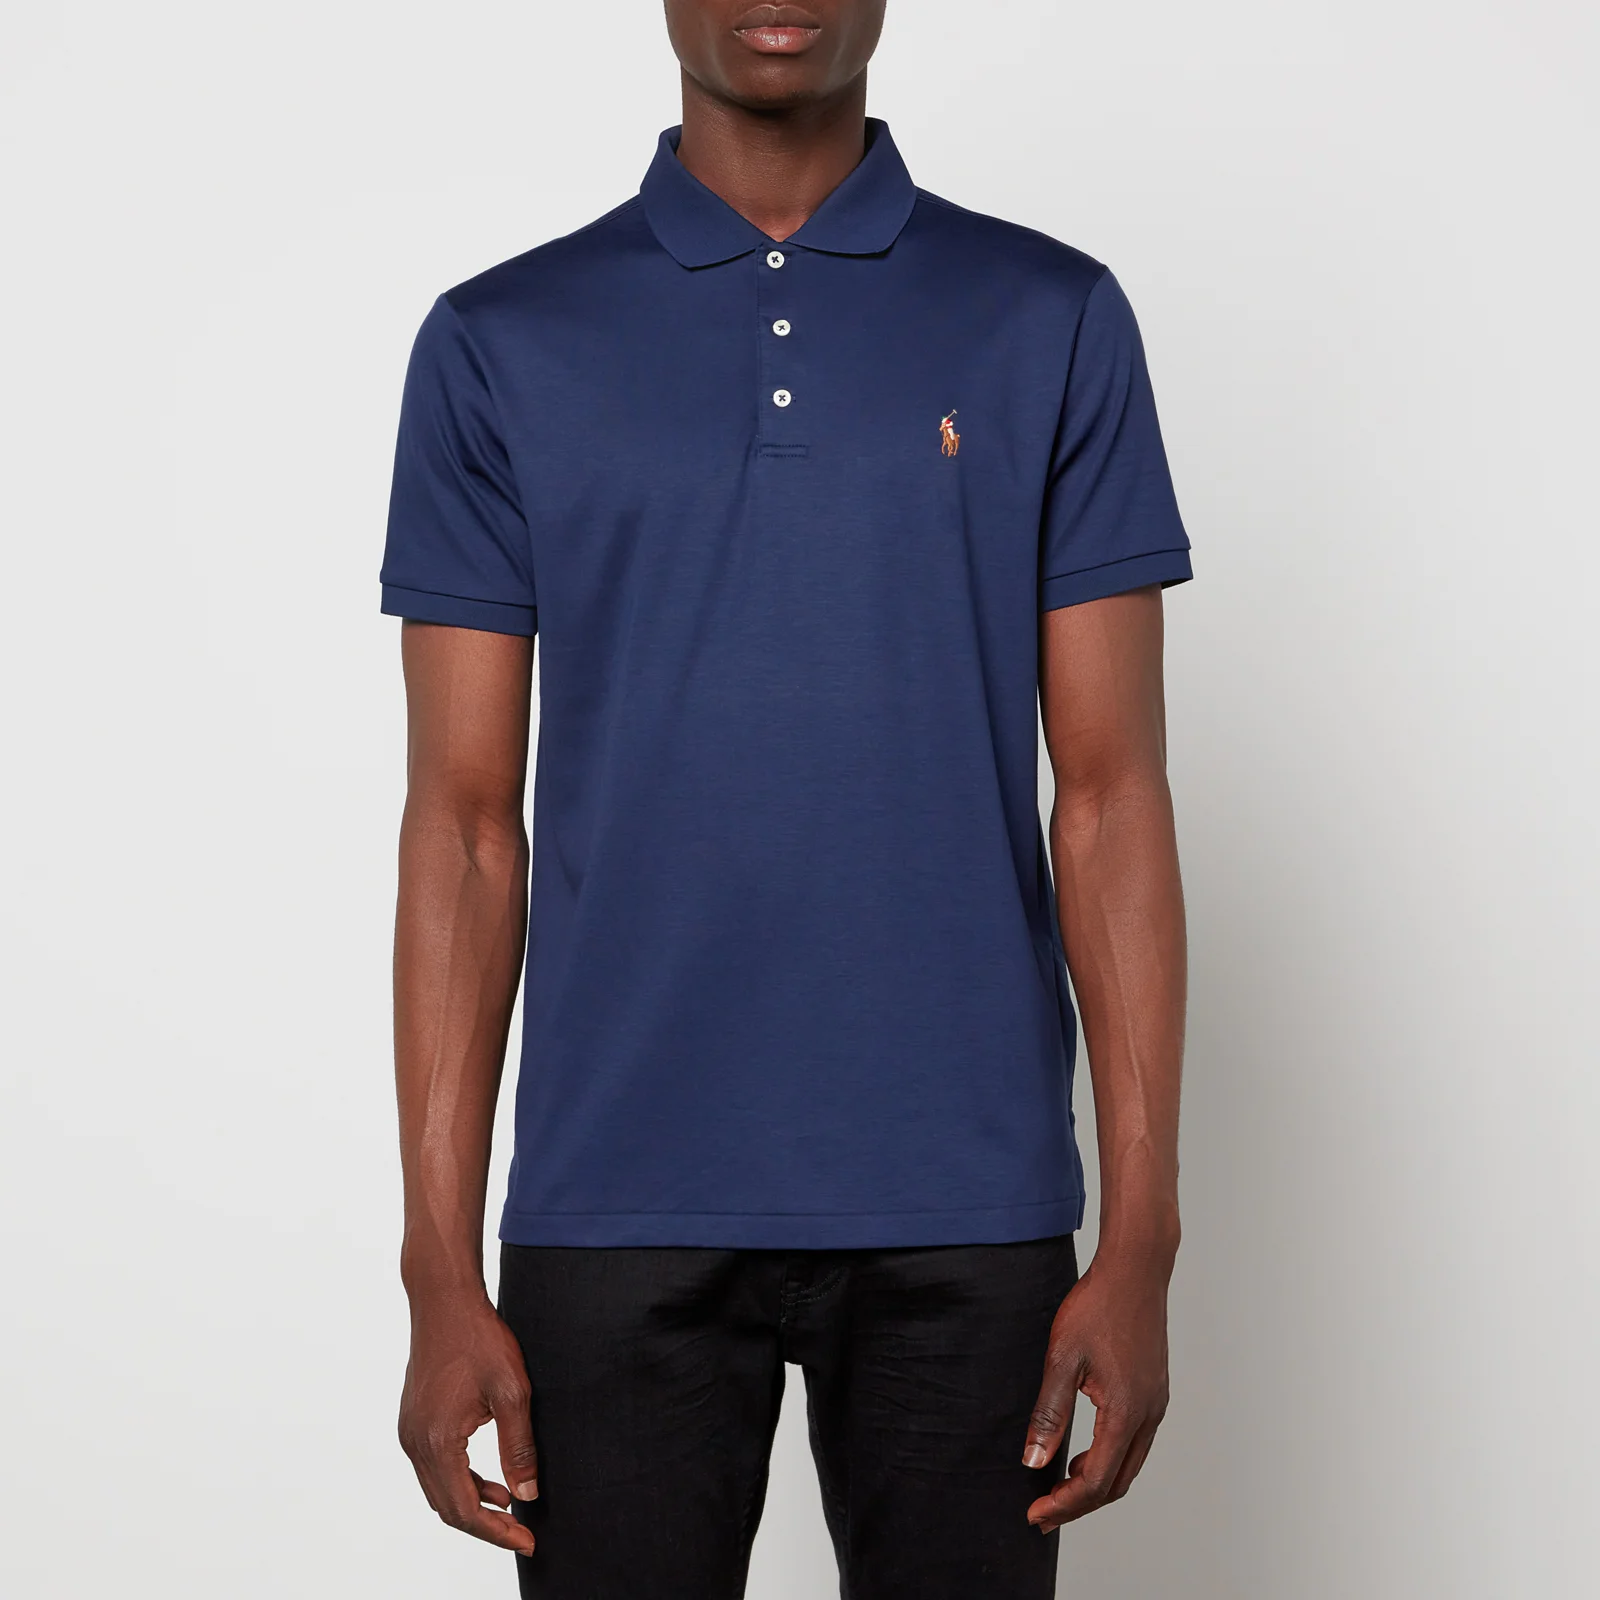 Polo Ralph Lauren Men's Slim Fit Soft Touch Polo Shirt - French Navy Image 1